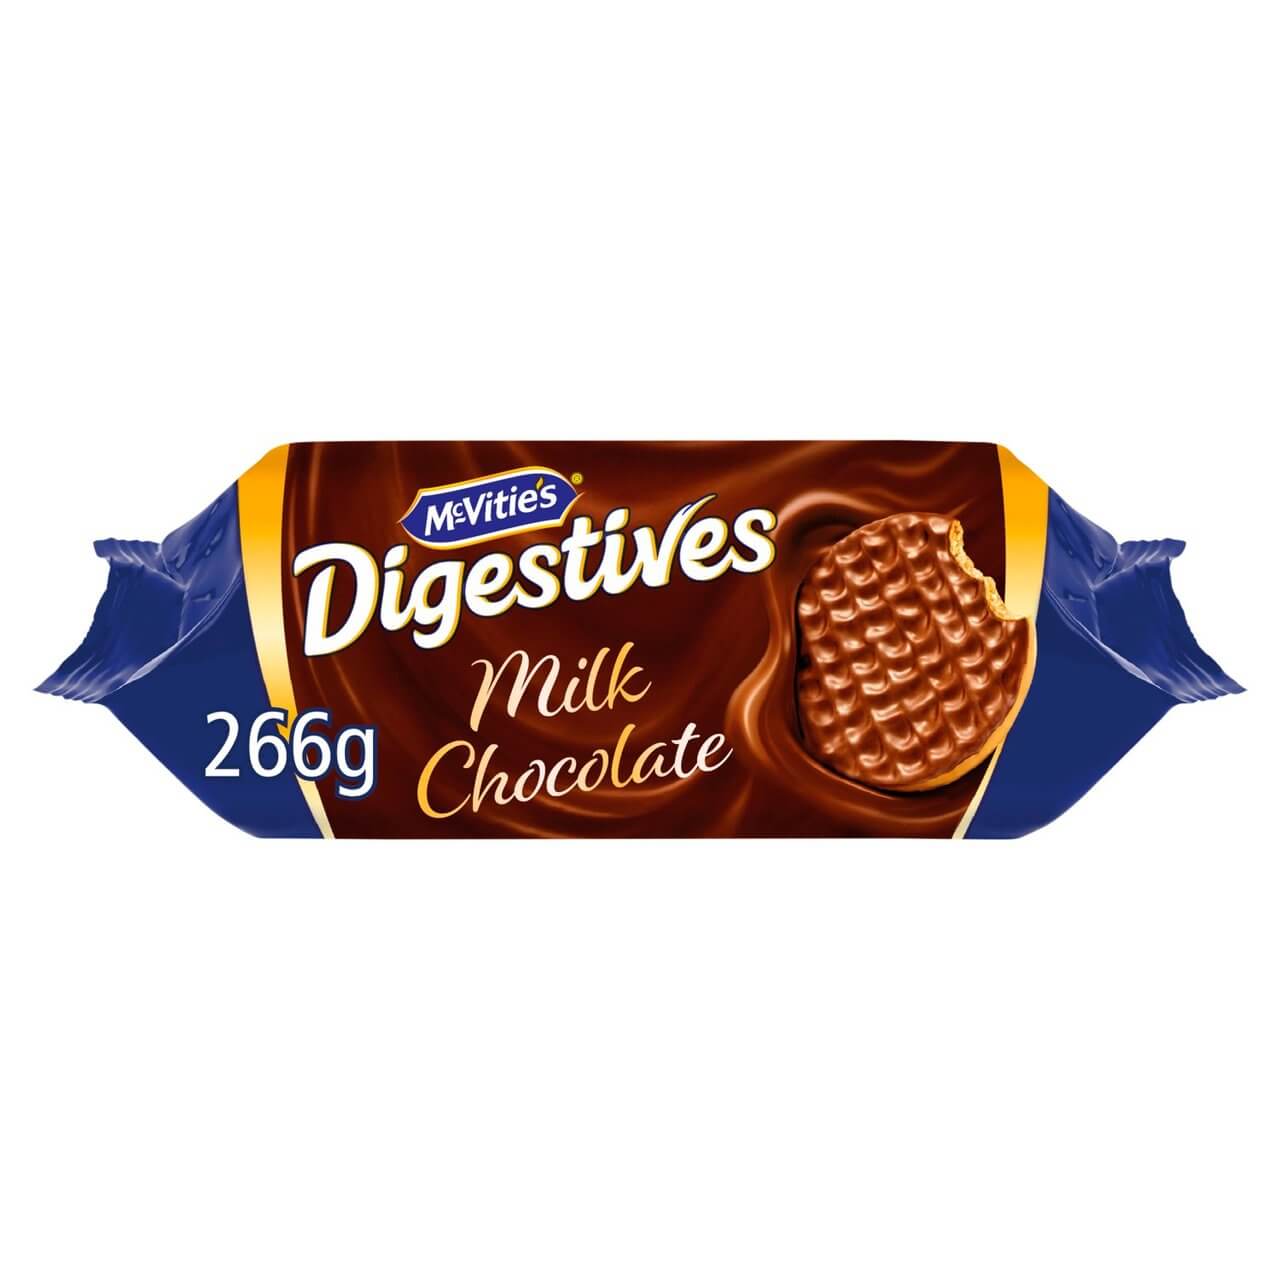 A glimpse of diverse products by McVitie's, supporting the UK economy on YouK.